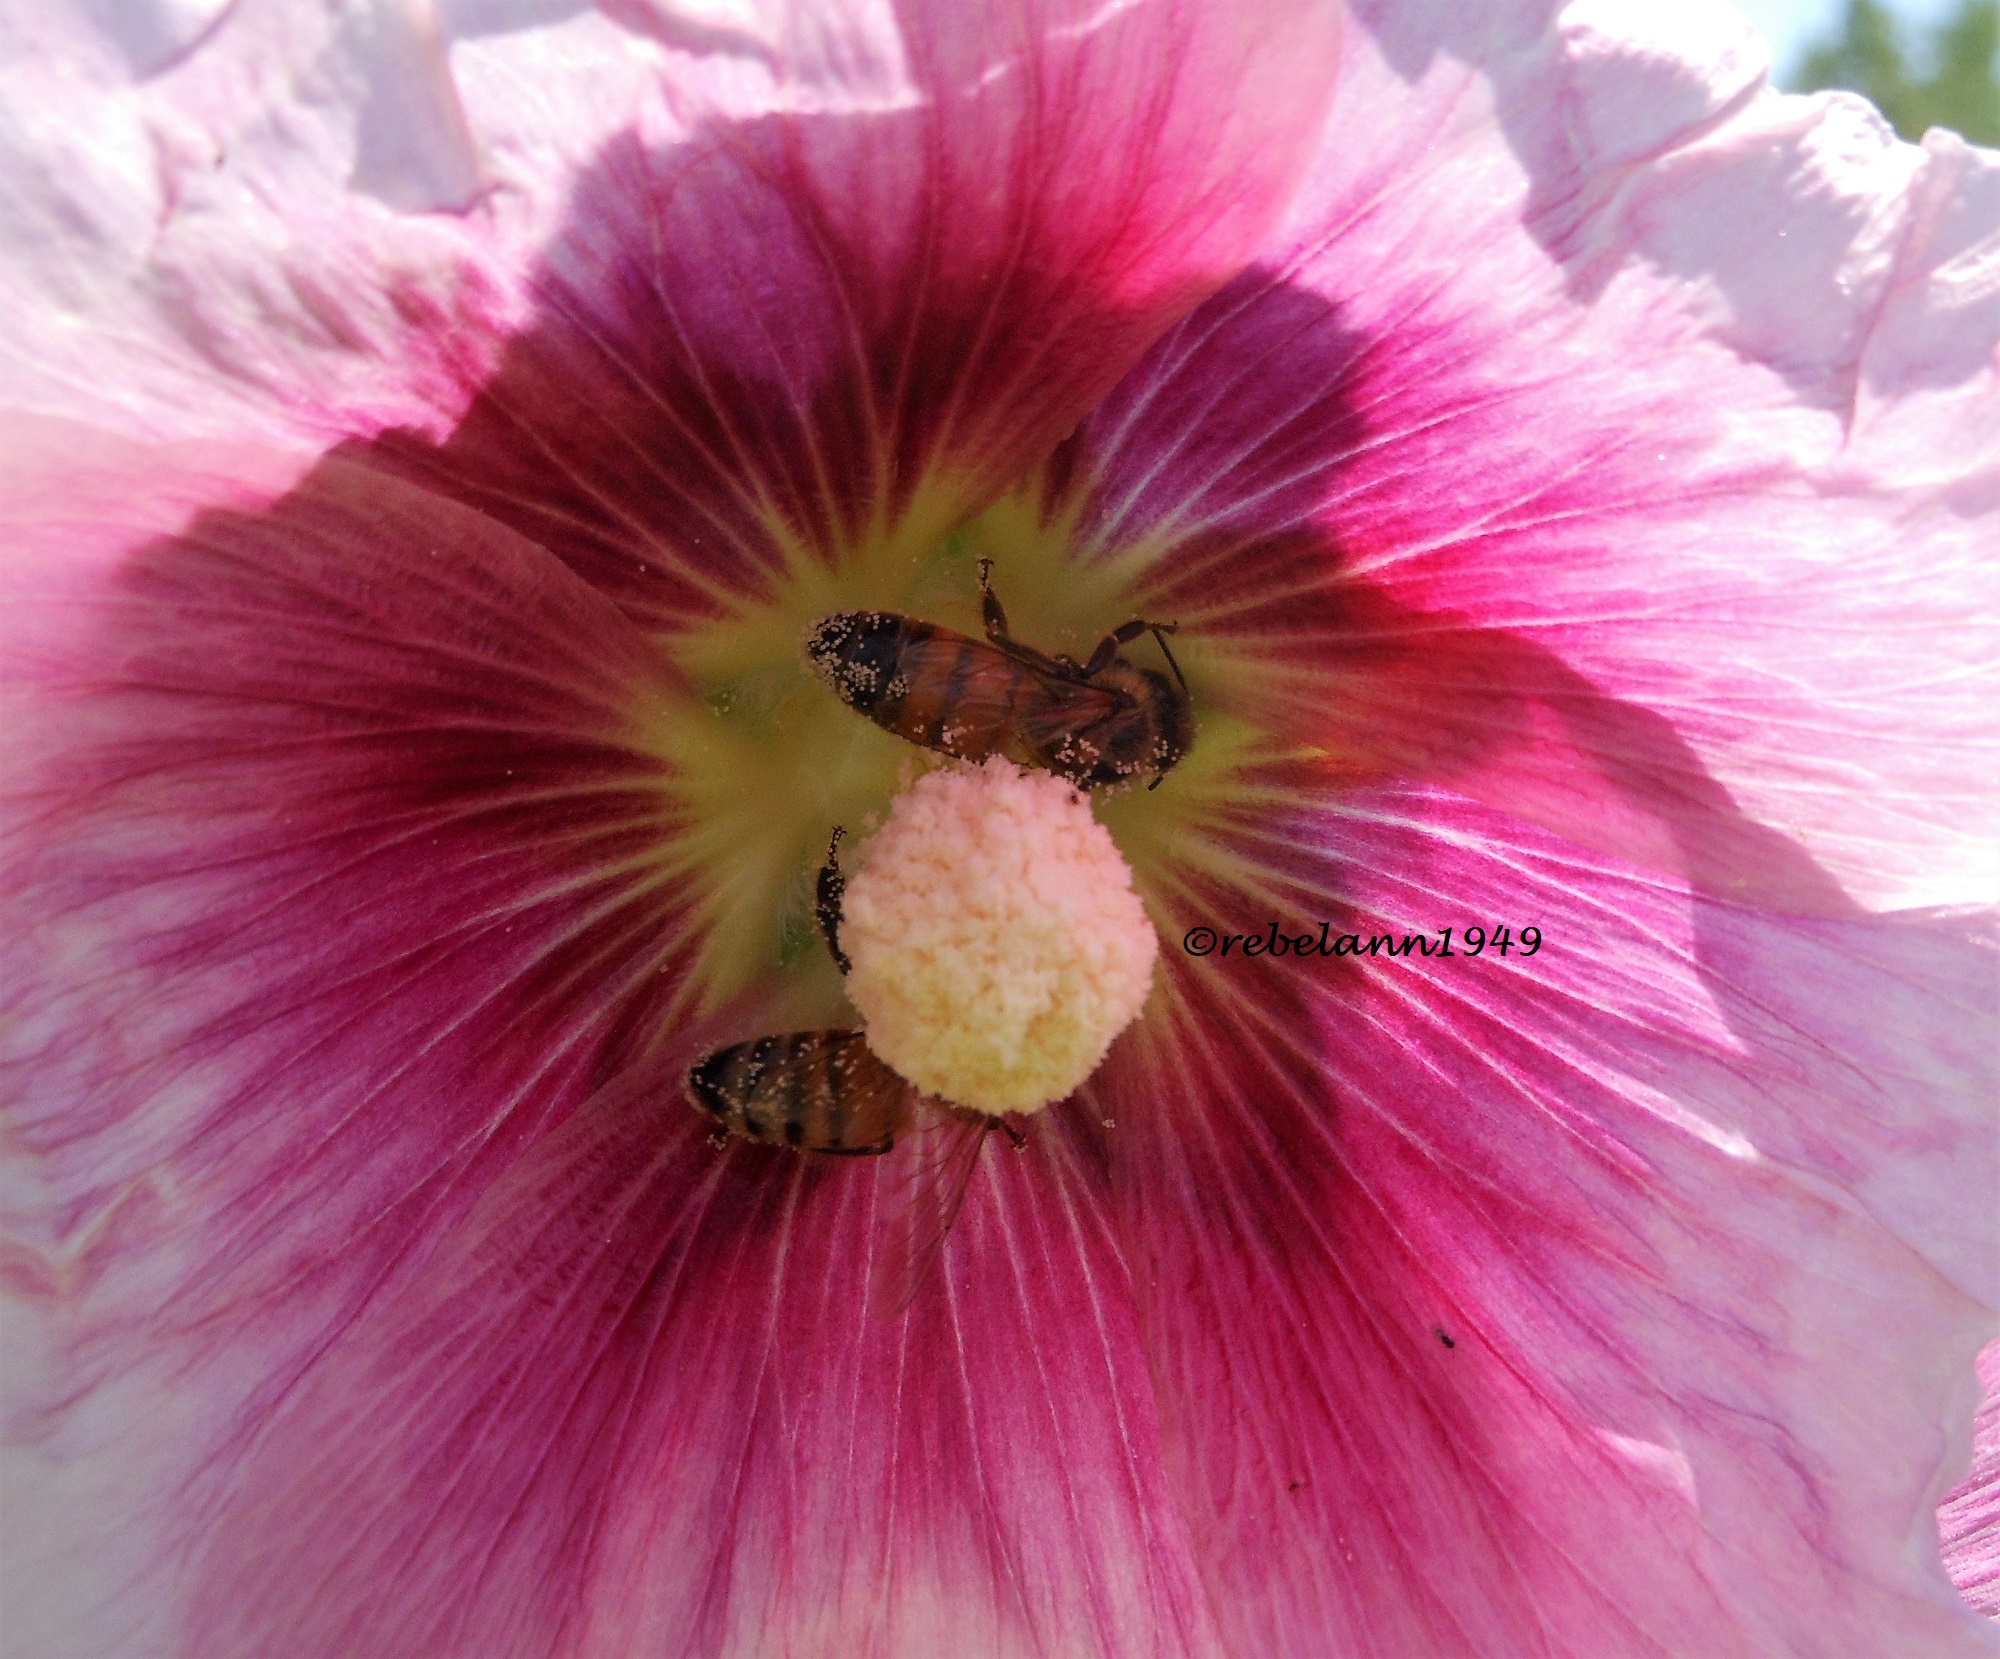 Hollyhock blossom with 2 bees, I took this shot in 2012.